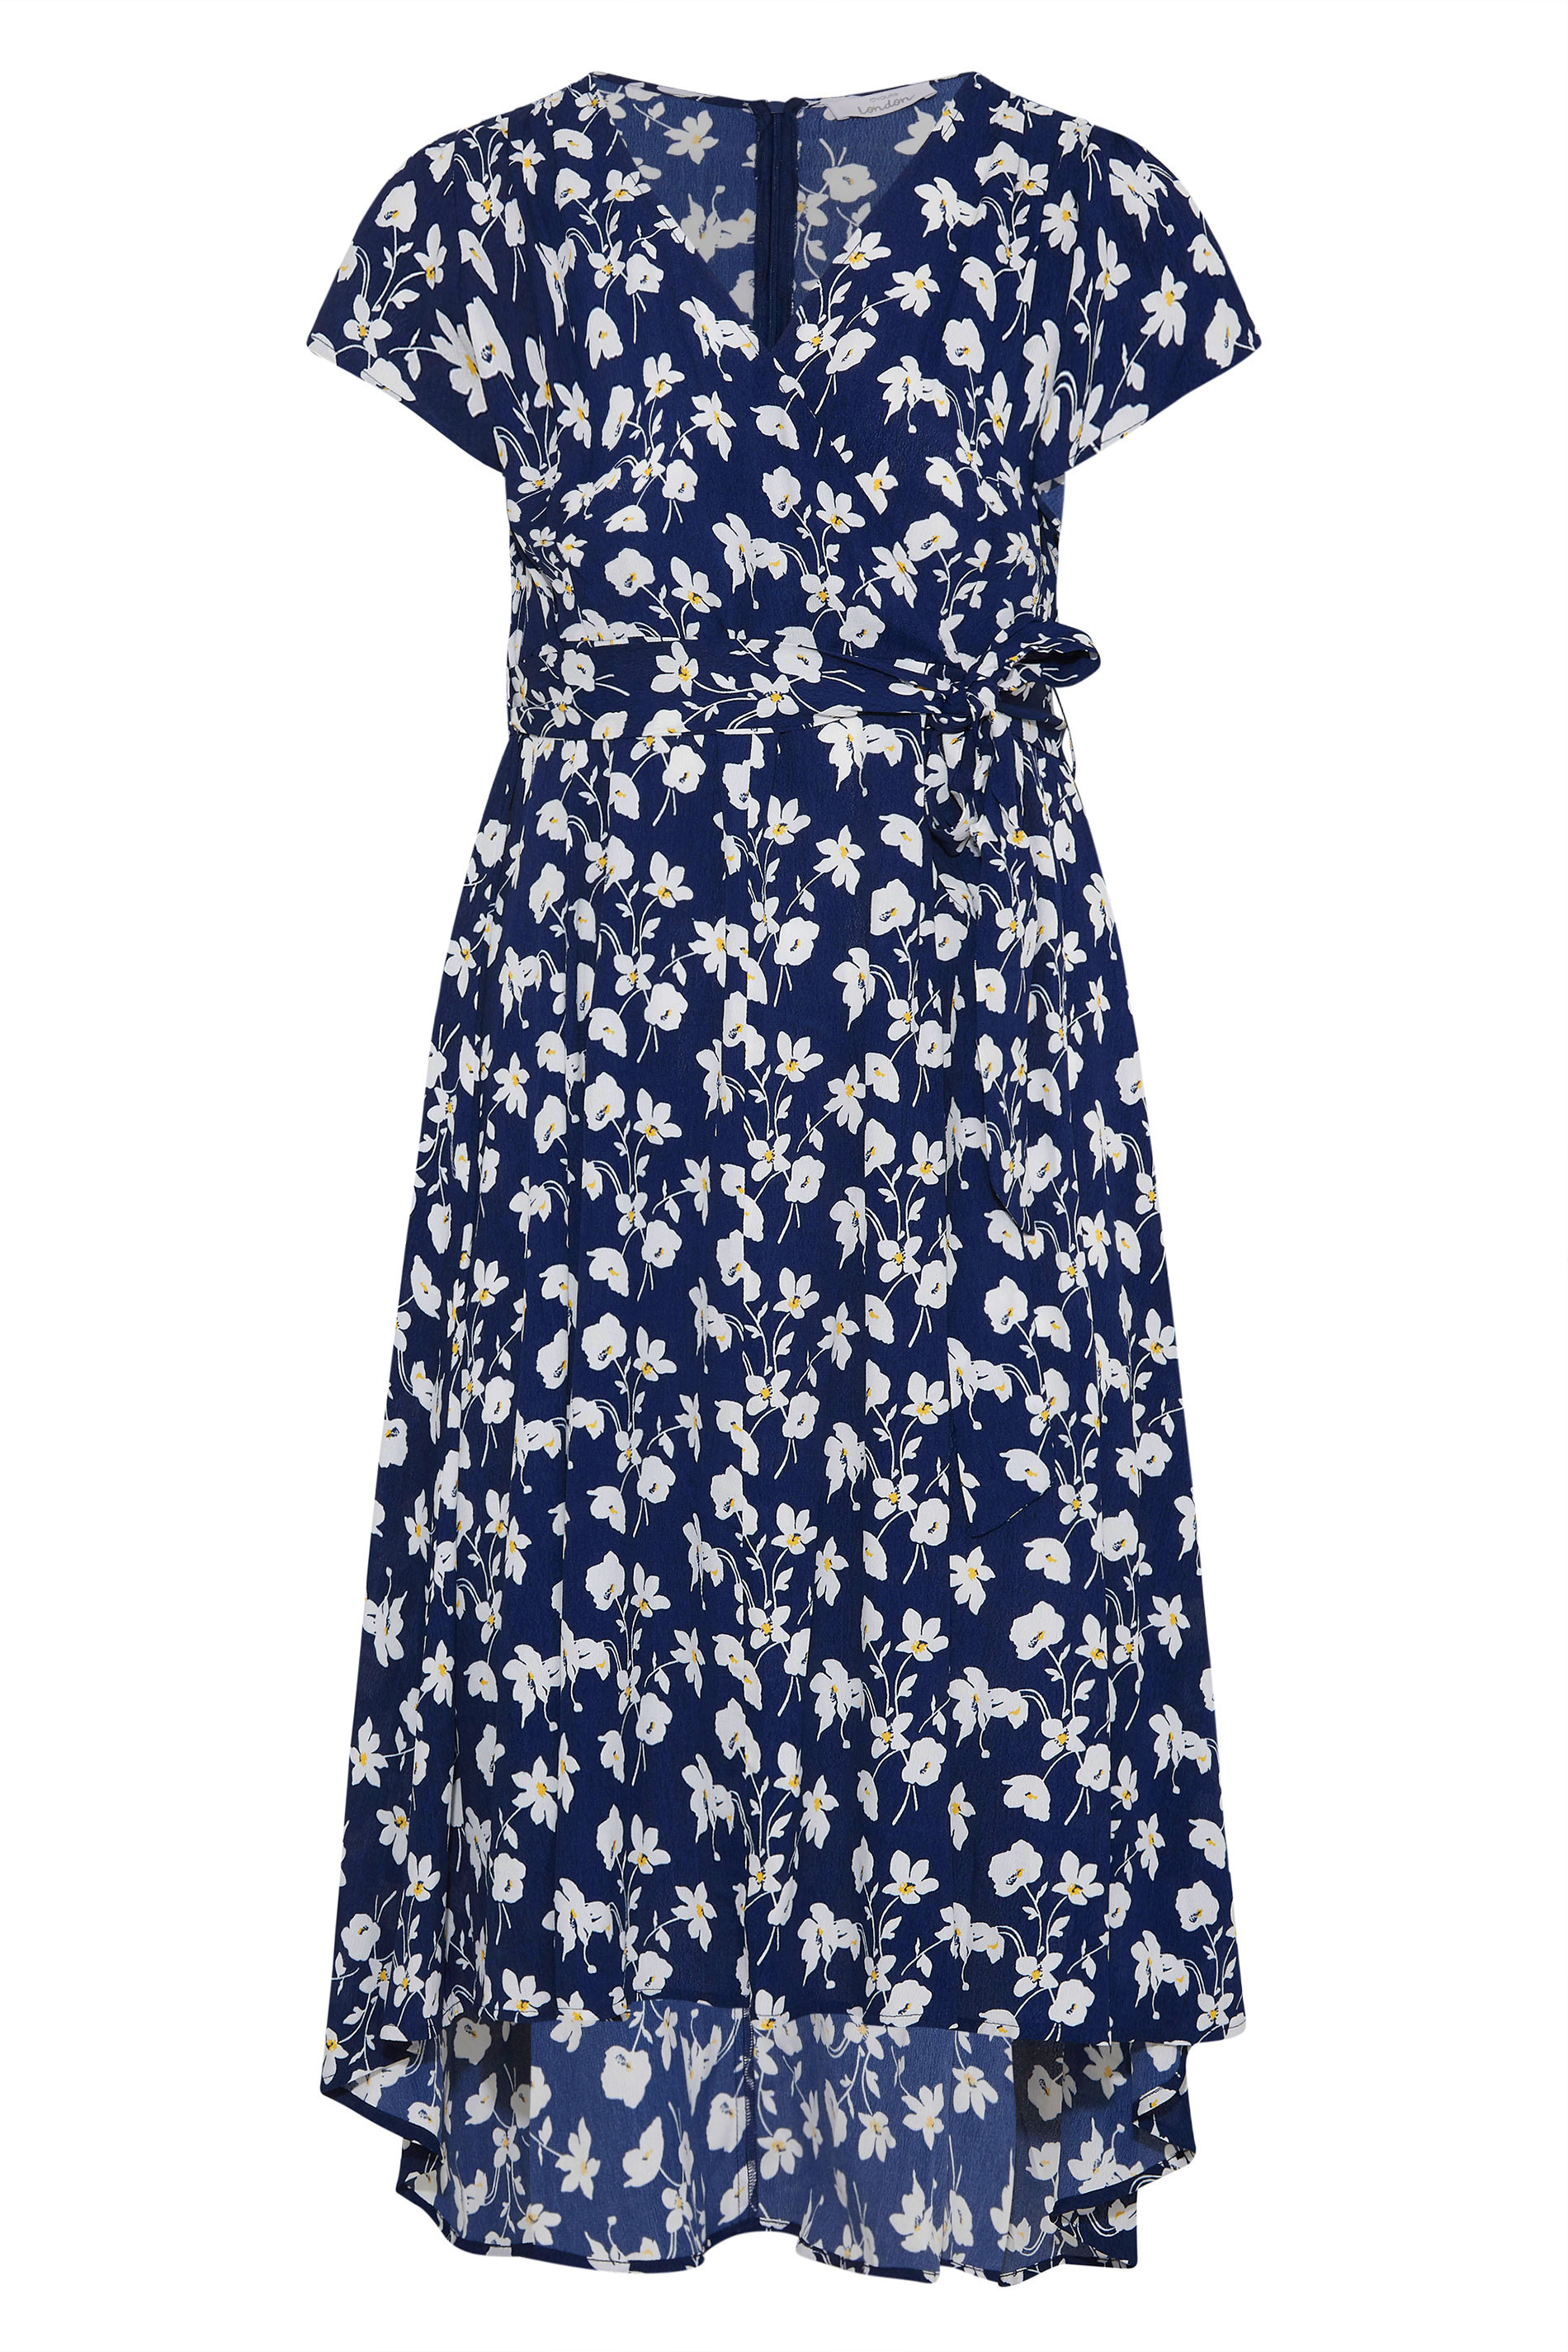 Robes Grande Taille Grande taille  Robes Portefeuilles | YOURS LONDON - Robe Midi Bleue Marine Floral Cache-Coeur - NG46821